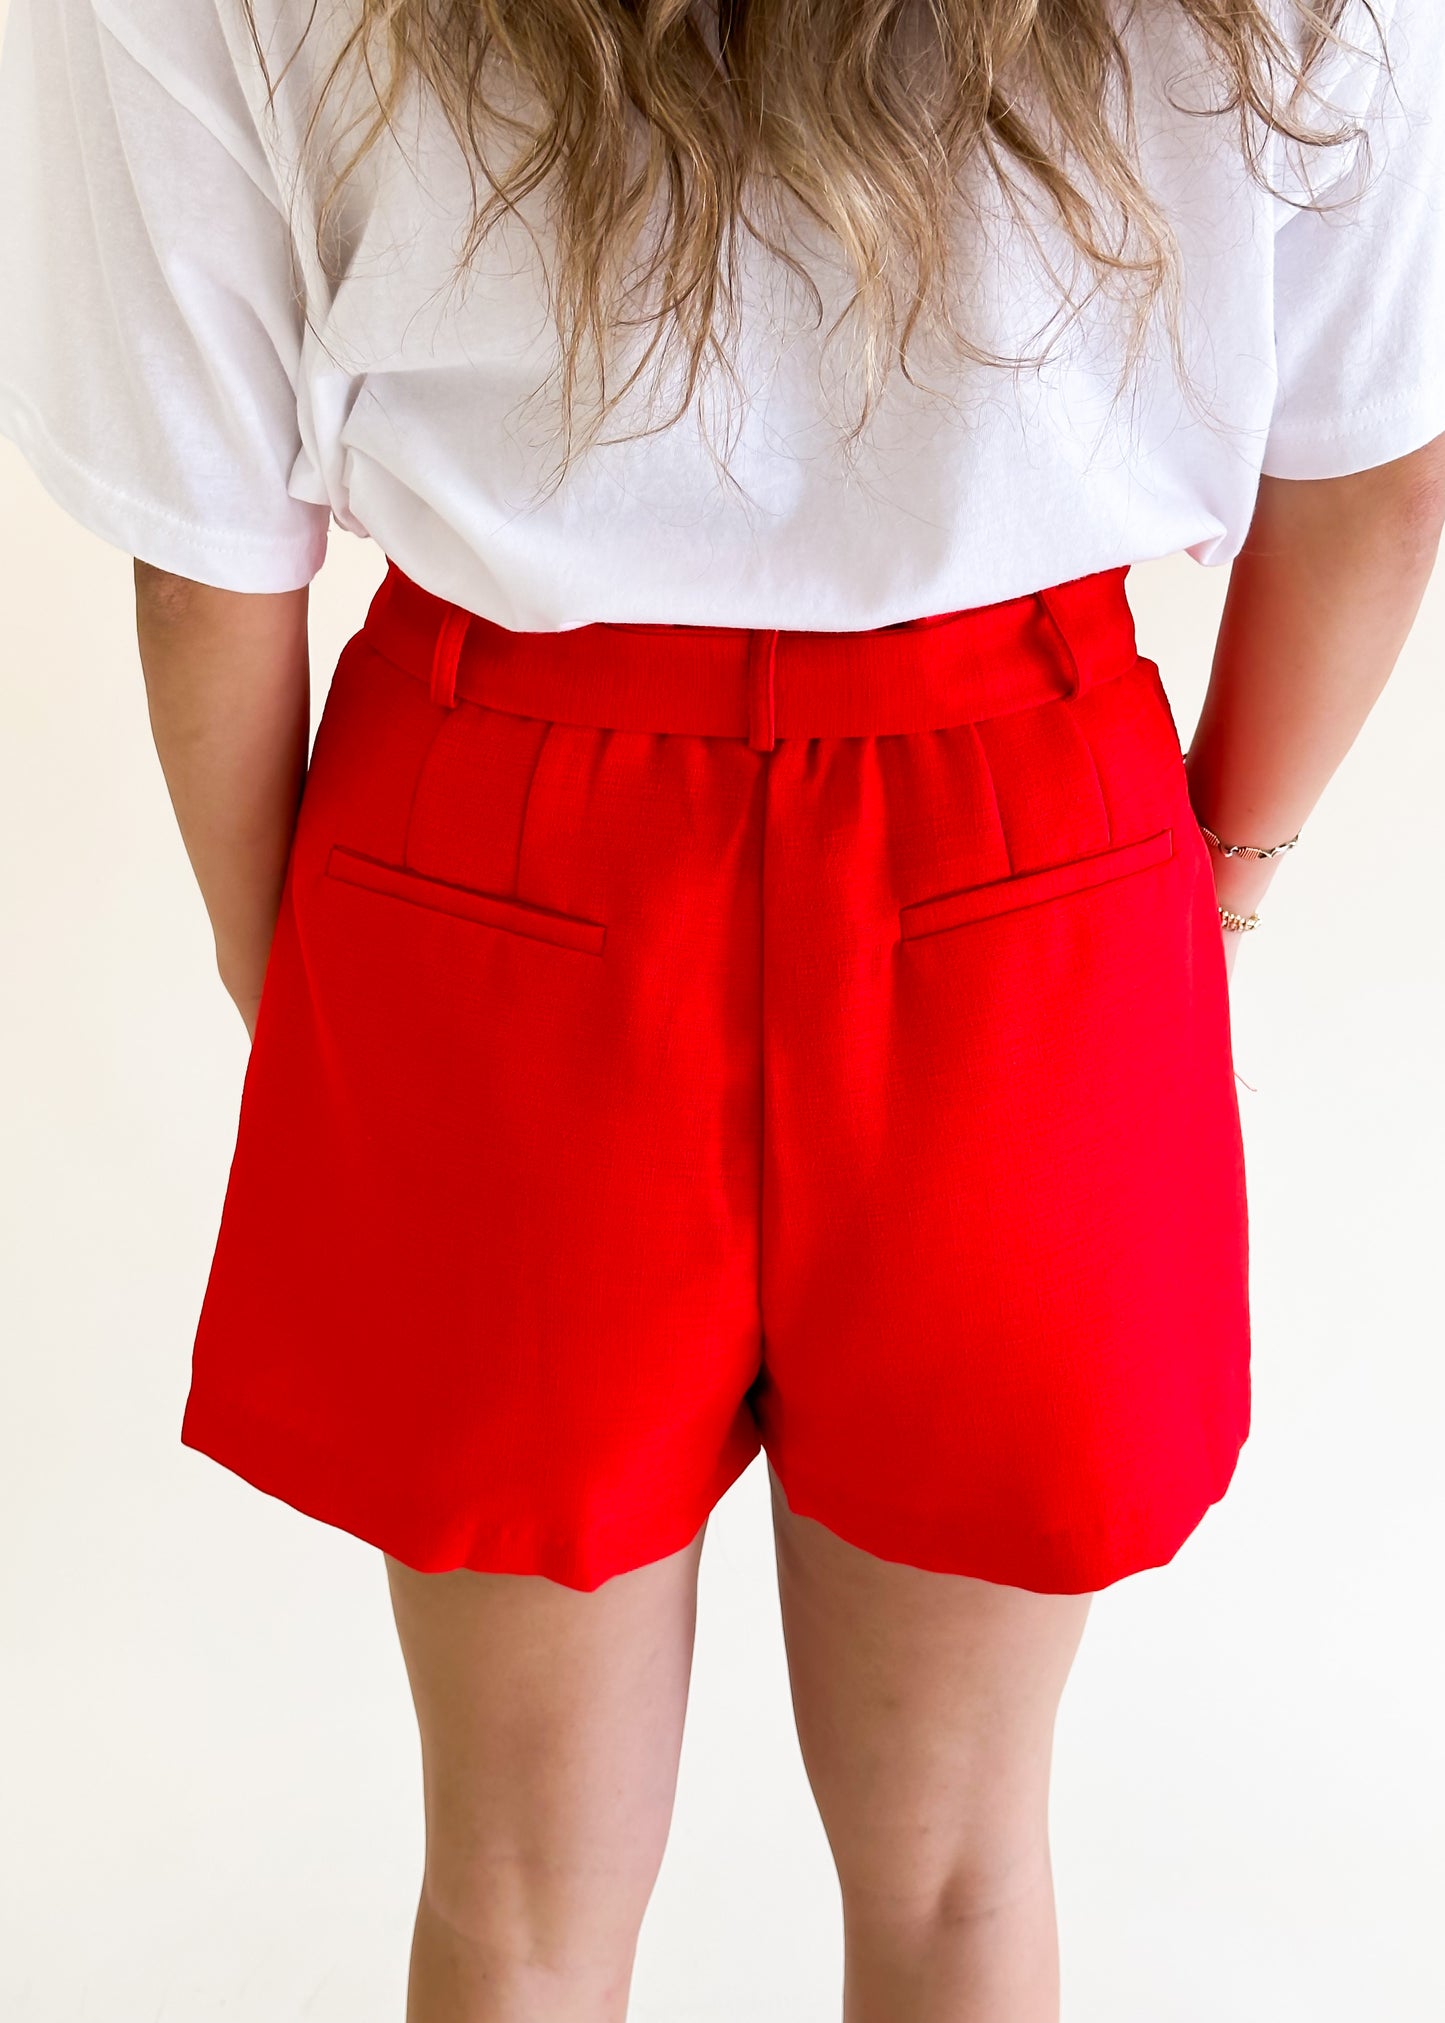 Tie Me Down Red Shorts